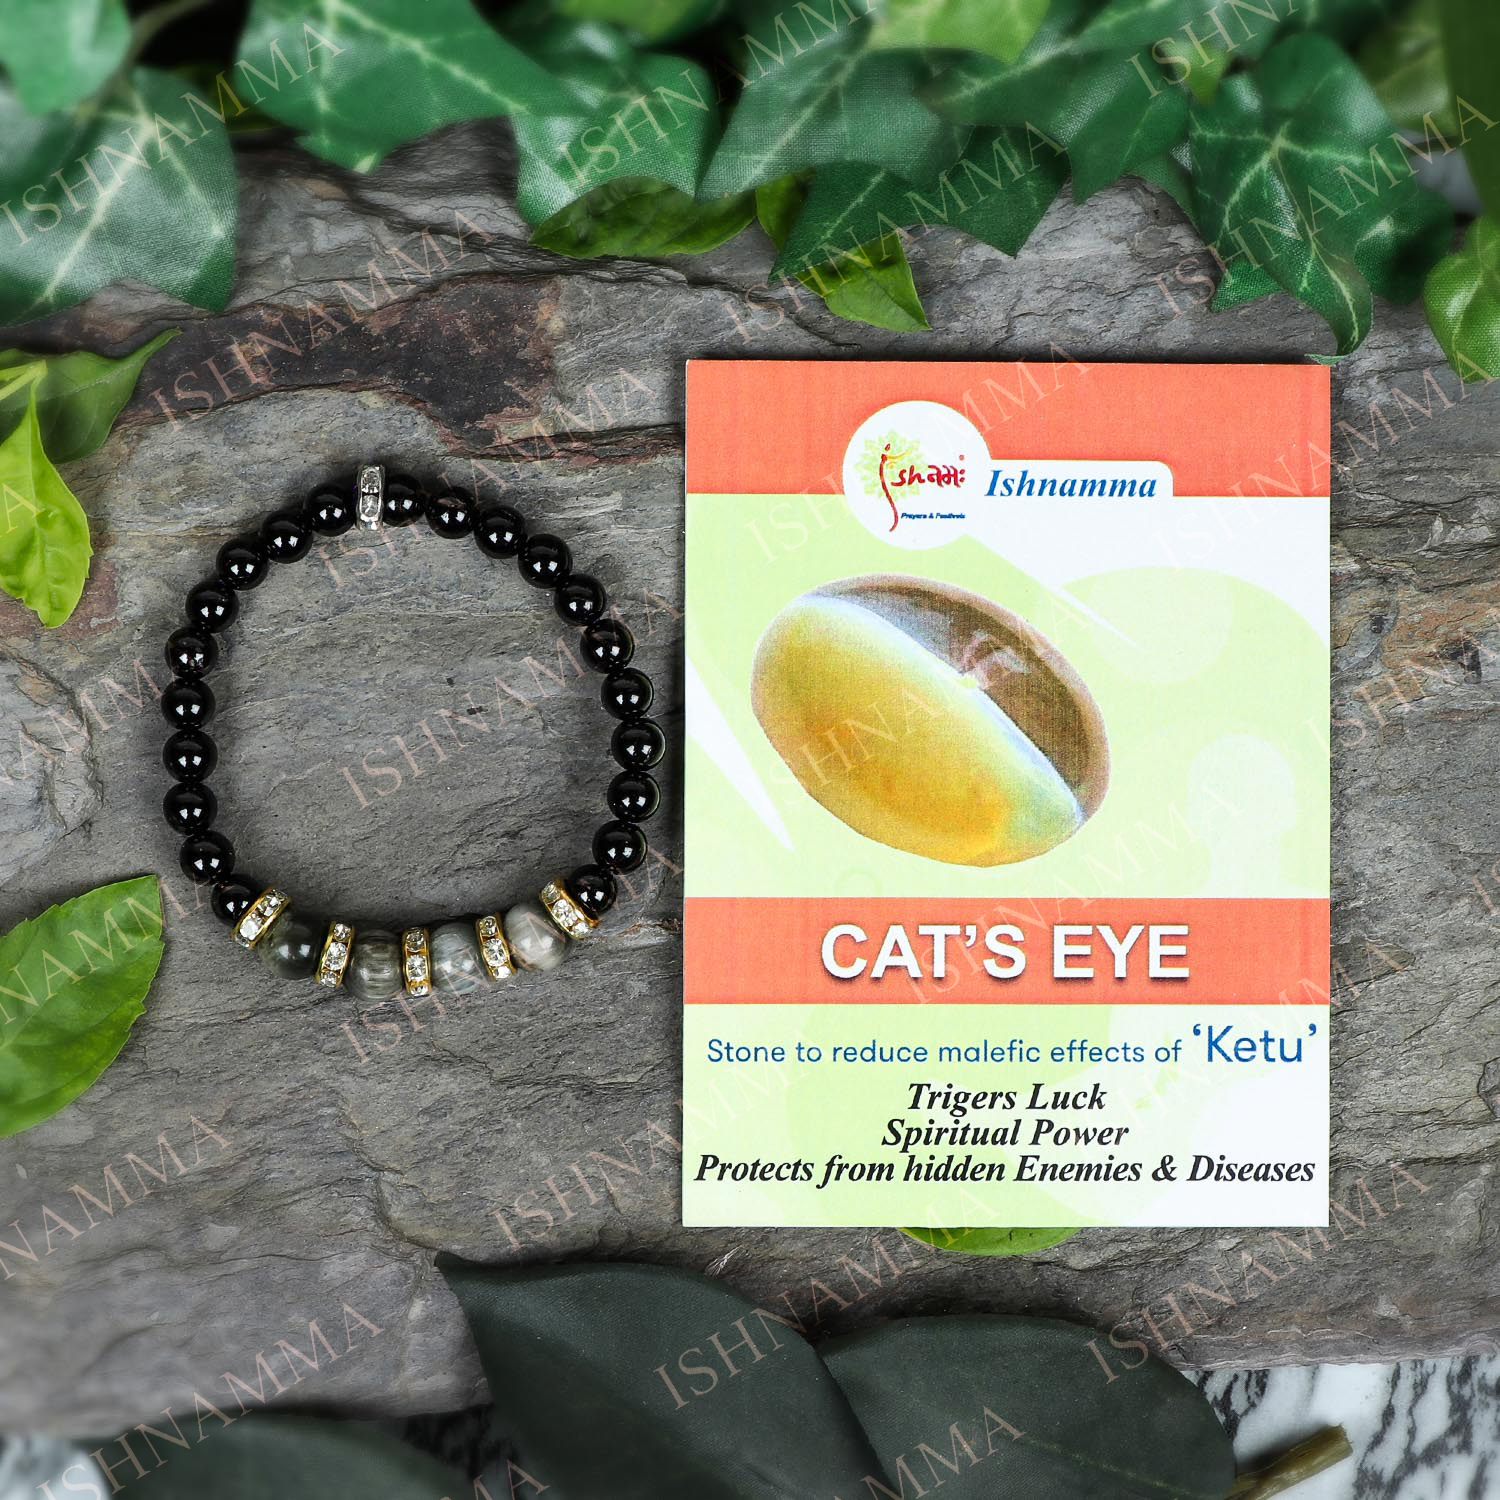 Brazilian Cat's Eye Old Mine Tourmaline Stretch Bracelet, 9mm, Comes With  Certificate Very Rare Very Rare Deal - Etsy